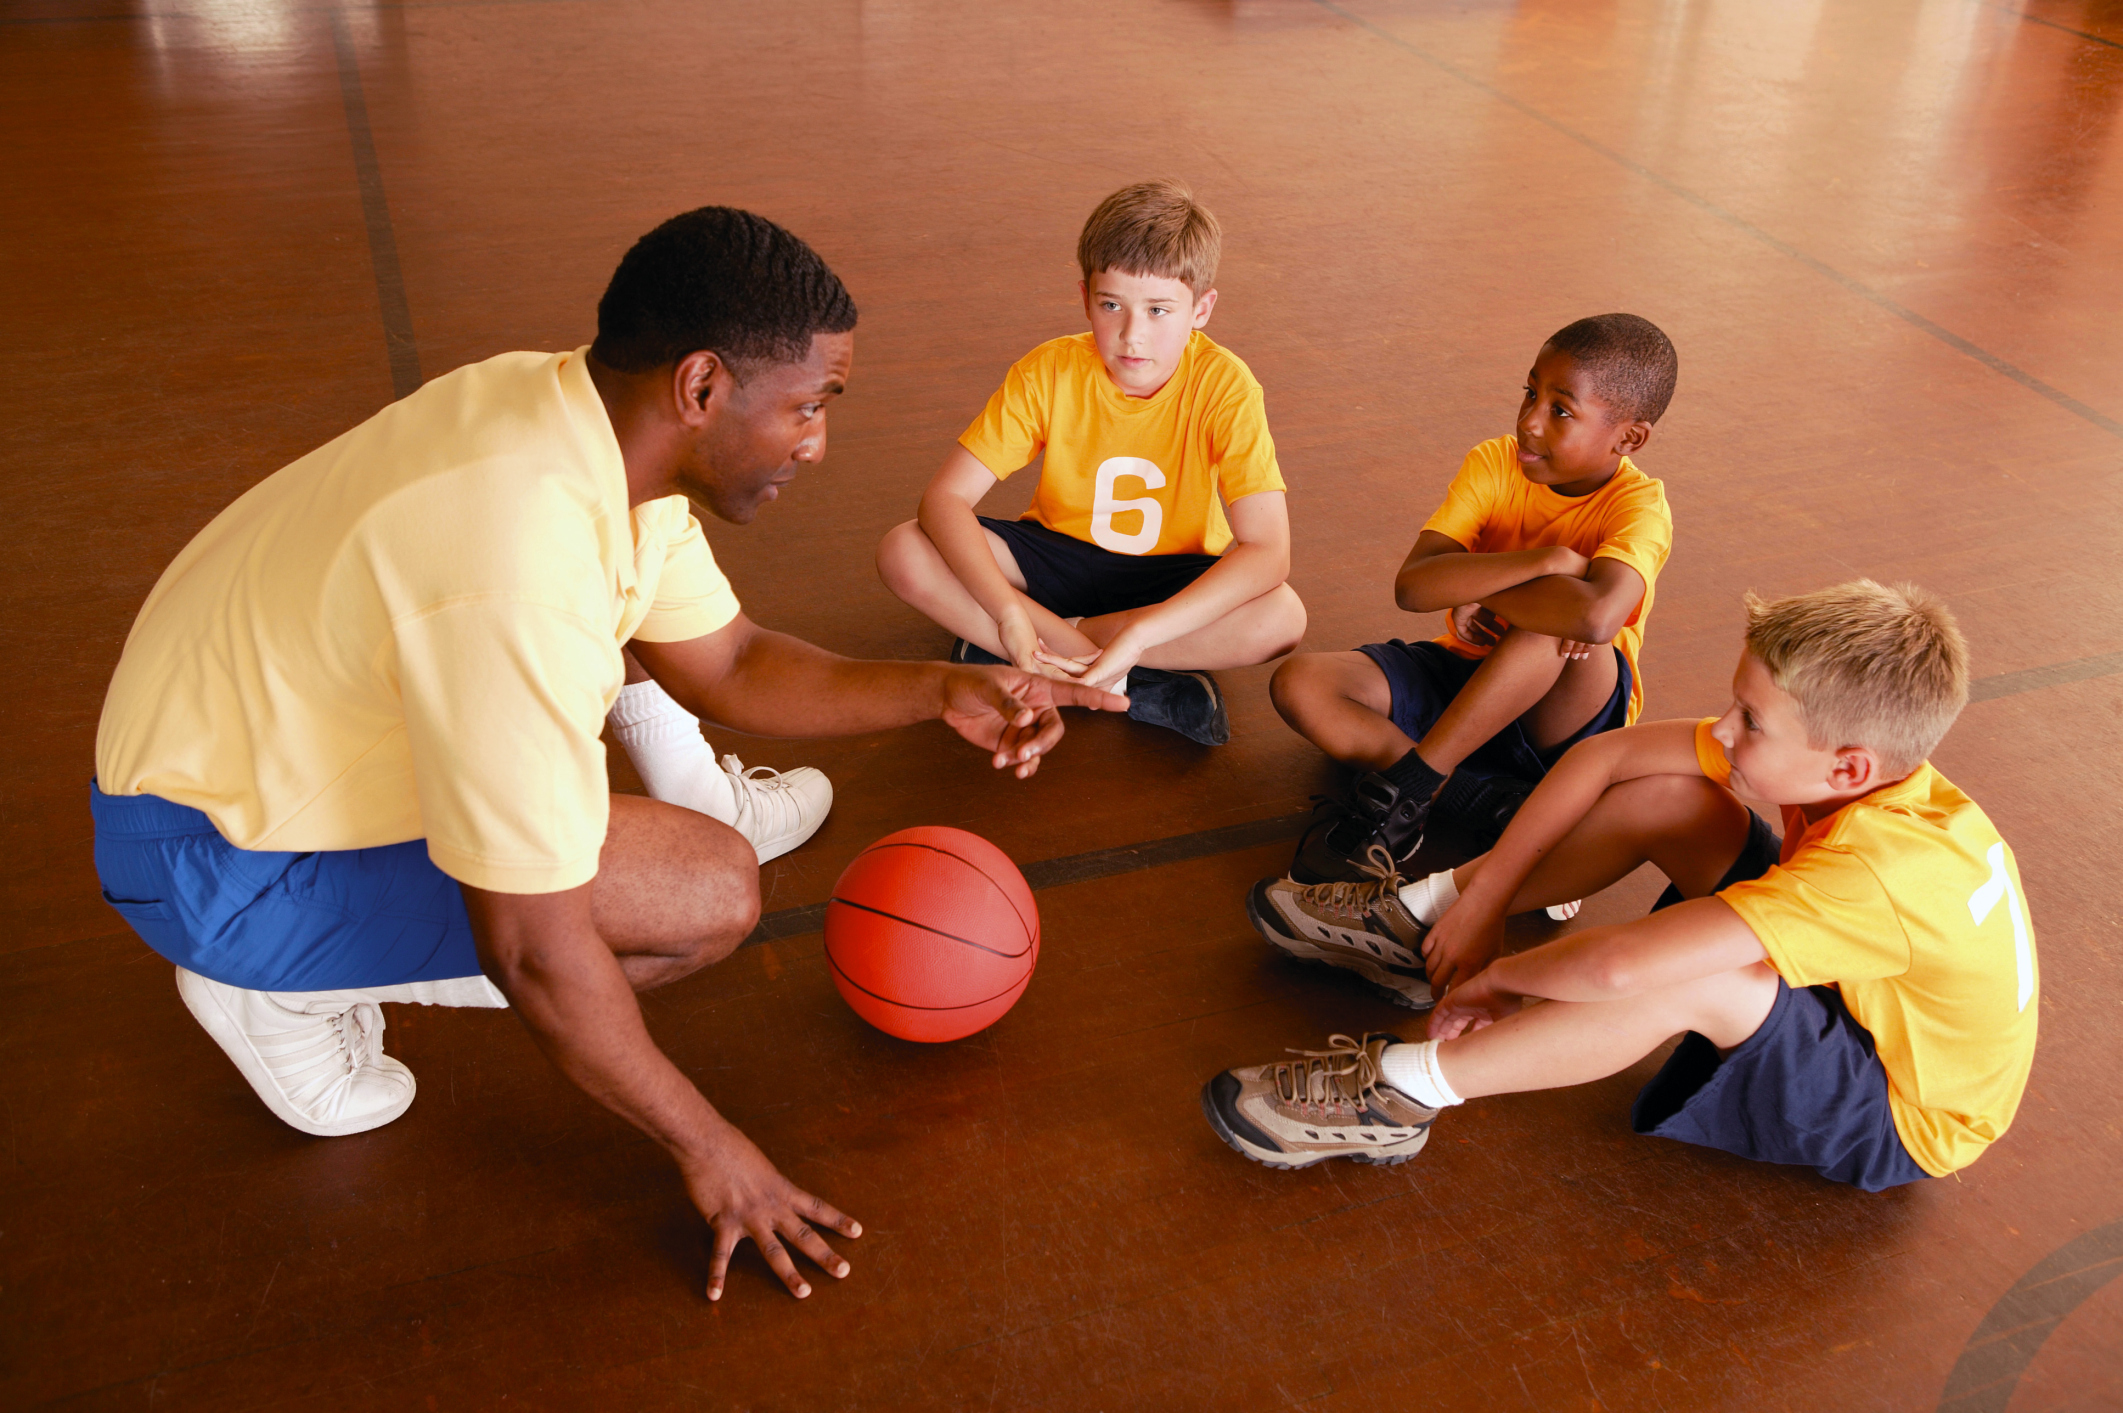 The Professionalization of Youth Sports